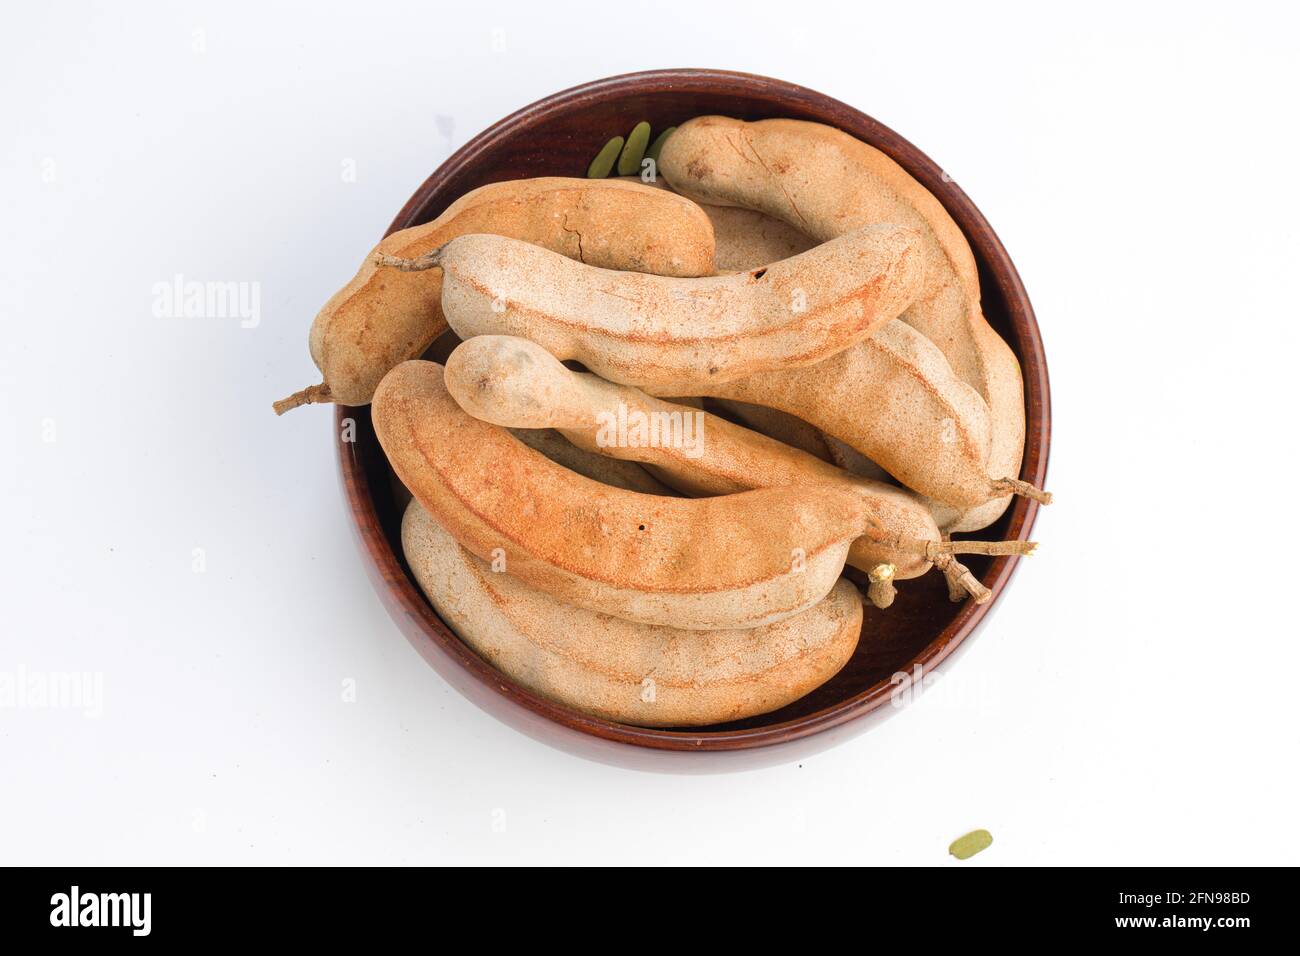 Tamarind  bean like pods filled with seeds surrounded by a fibrous pulp arranged in a basket with white textured background. Stock Photo